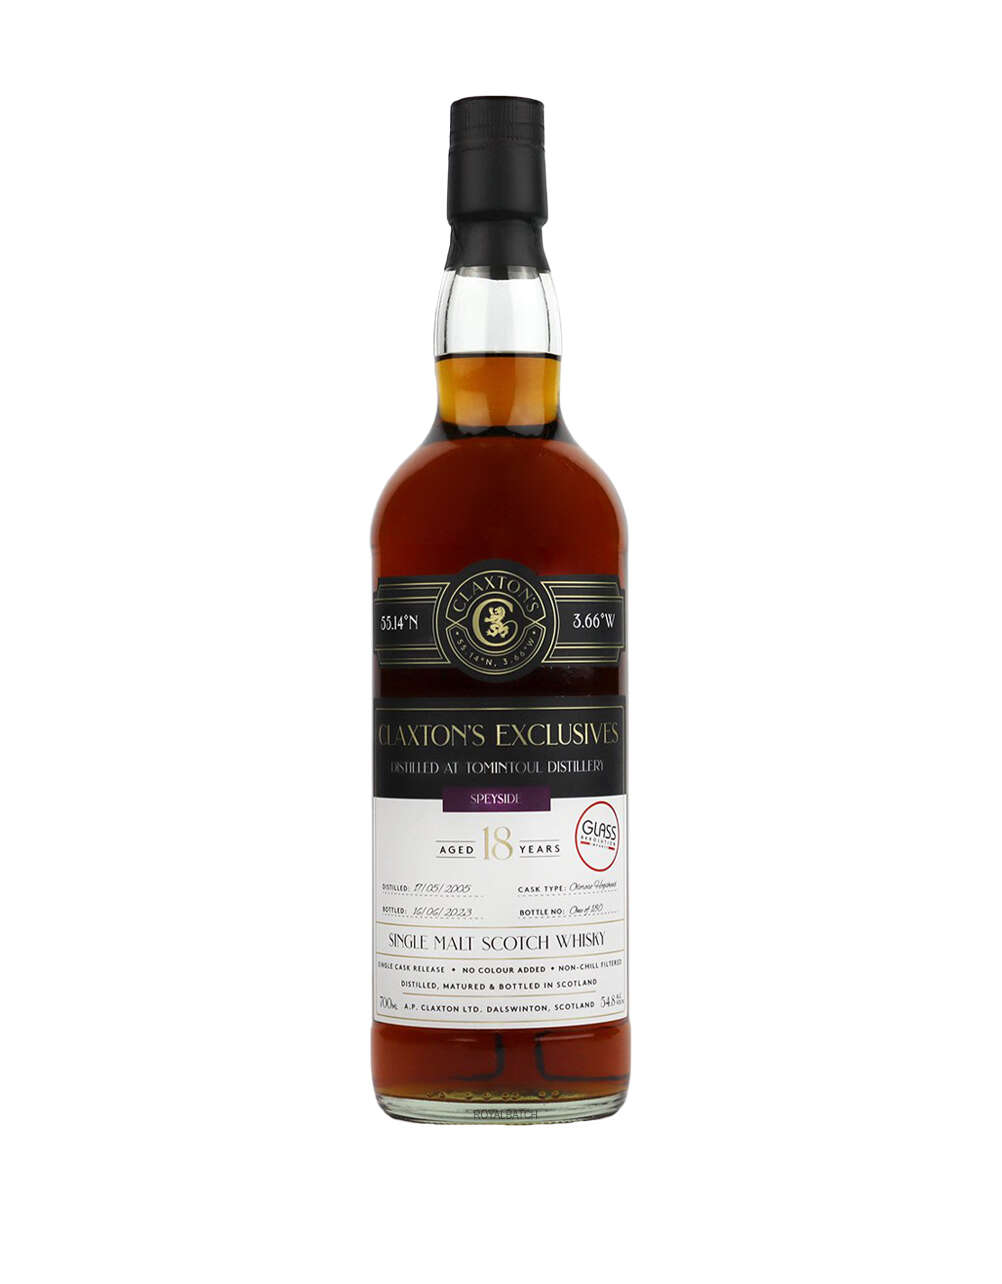 Claxtons Exclusives Speyside 18 Year Old Single Malt Scotch Whisky